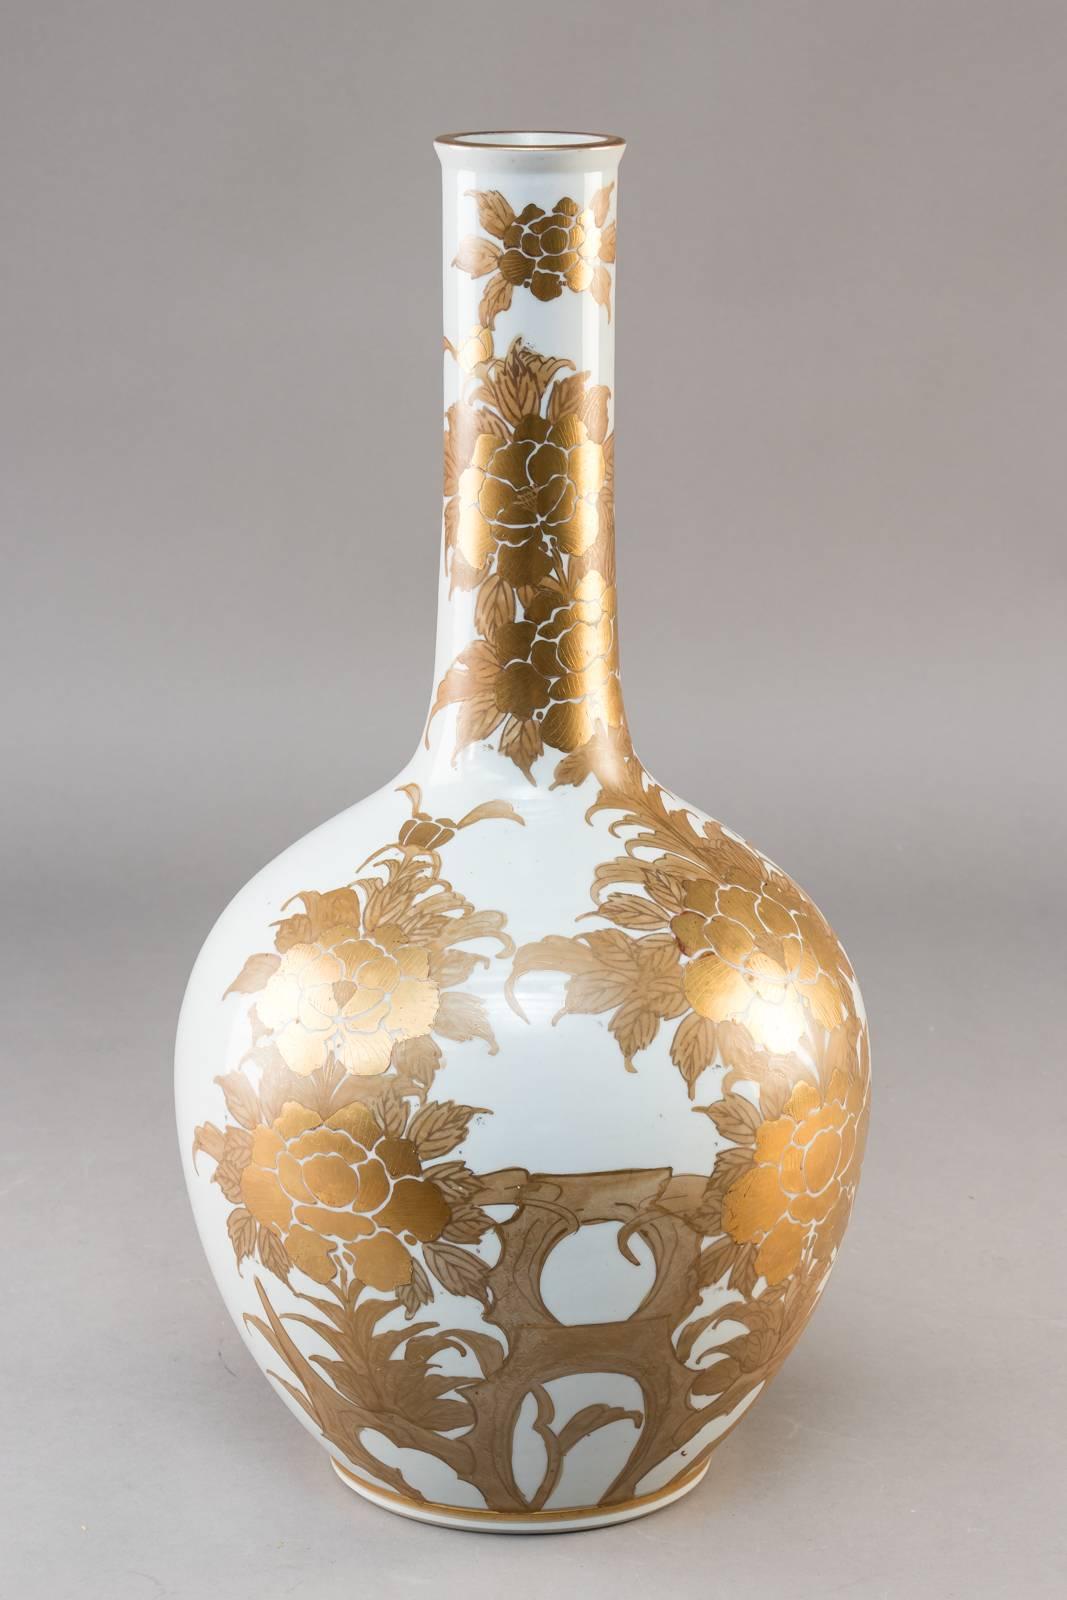 Japanese porcelain vase decorated with flowers in multicolored gold stamped at the bottom.
Measures: Height 50 cm. Made in the 1930s.
Burning error at bottom, not closed.